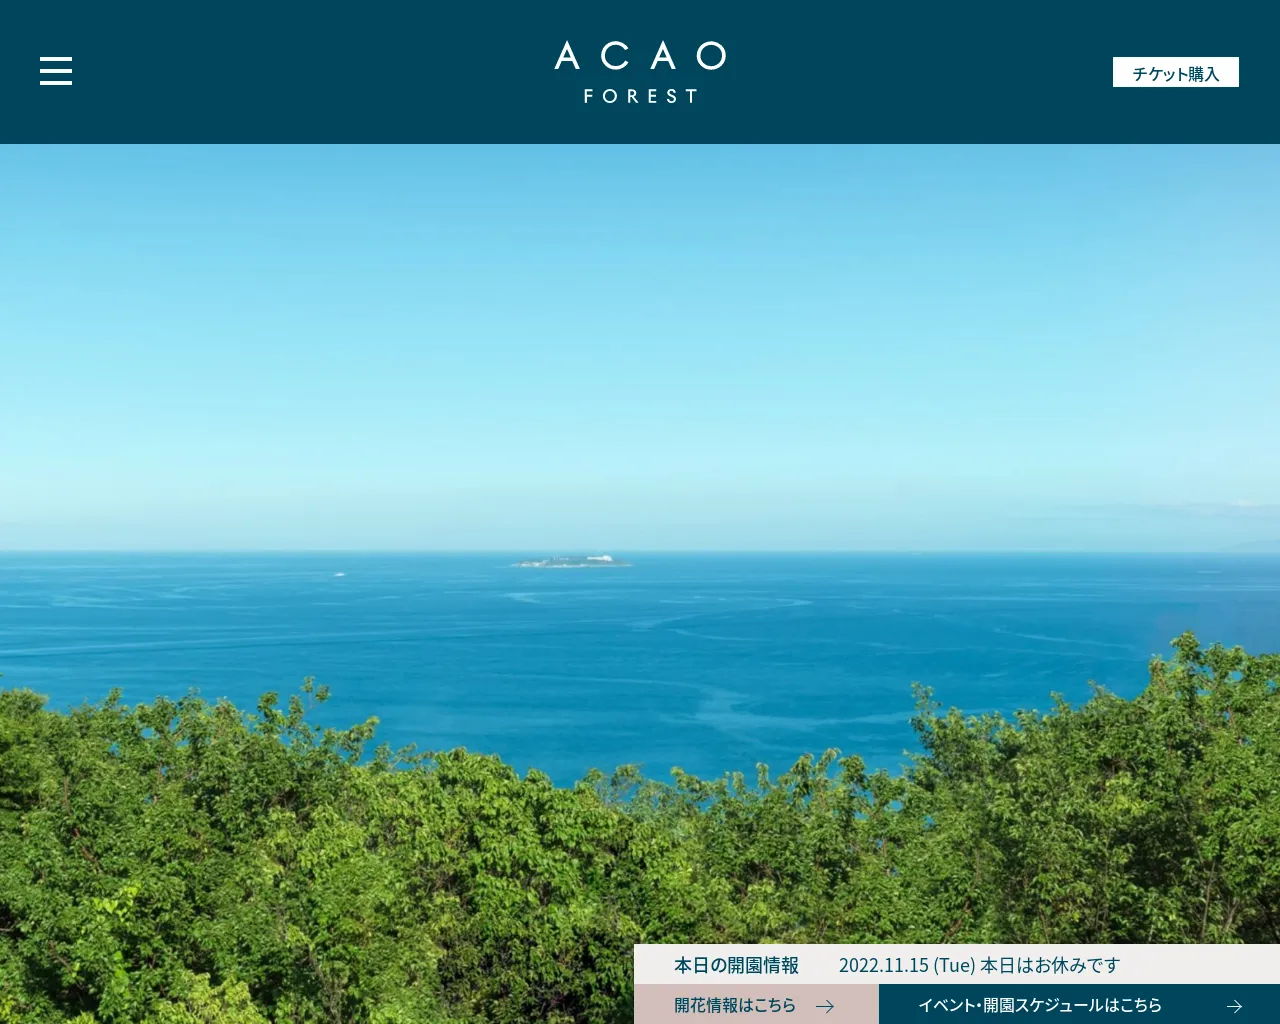 ACAO FOREST（旧アカオハーブ＆ローズガーデン） site